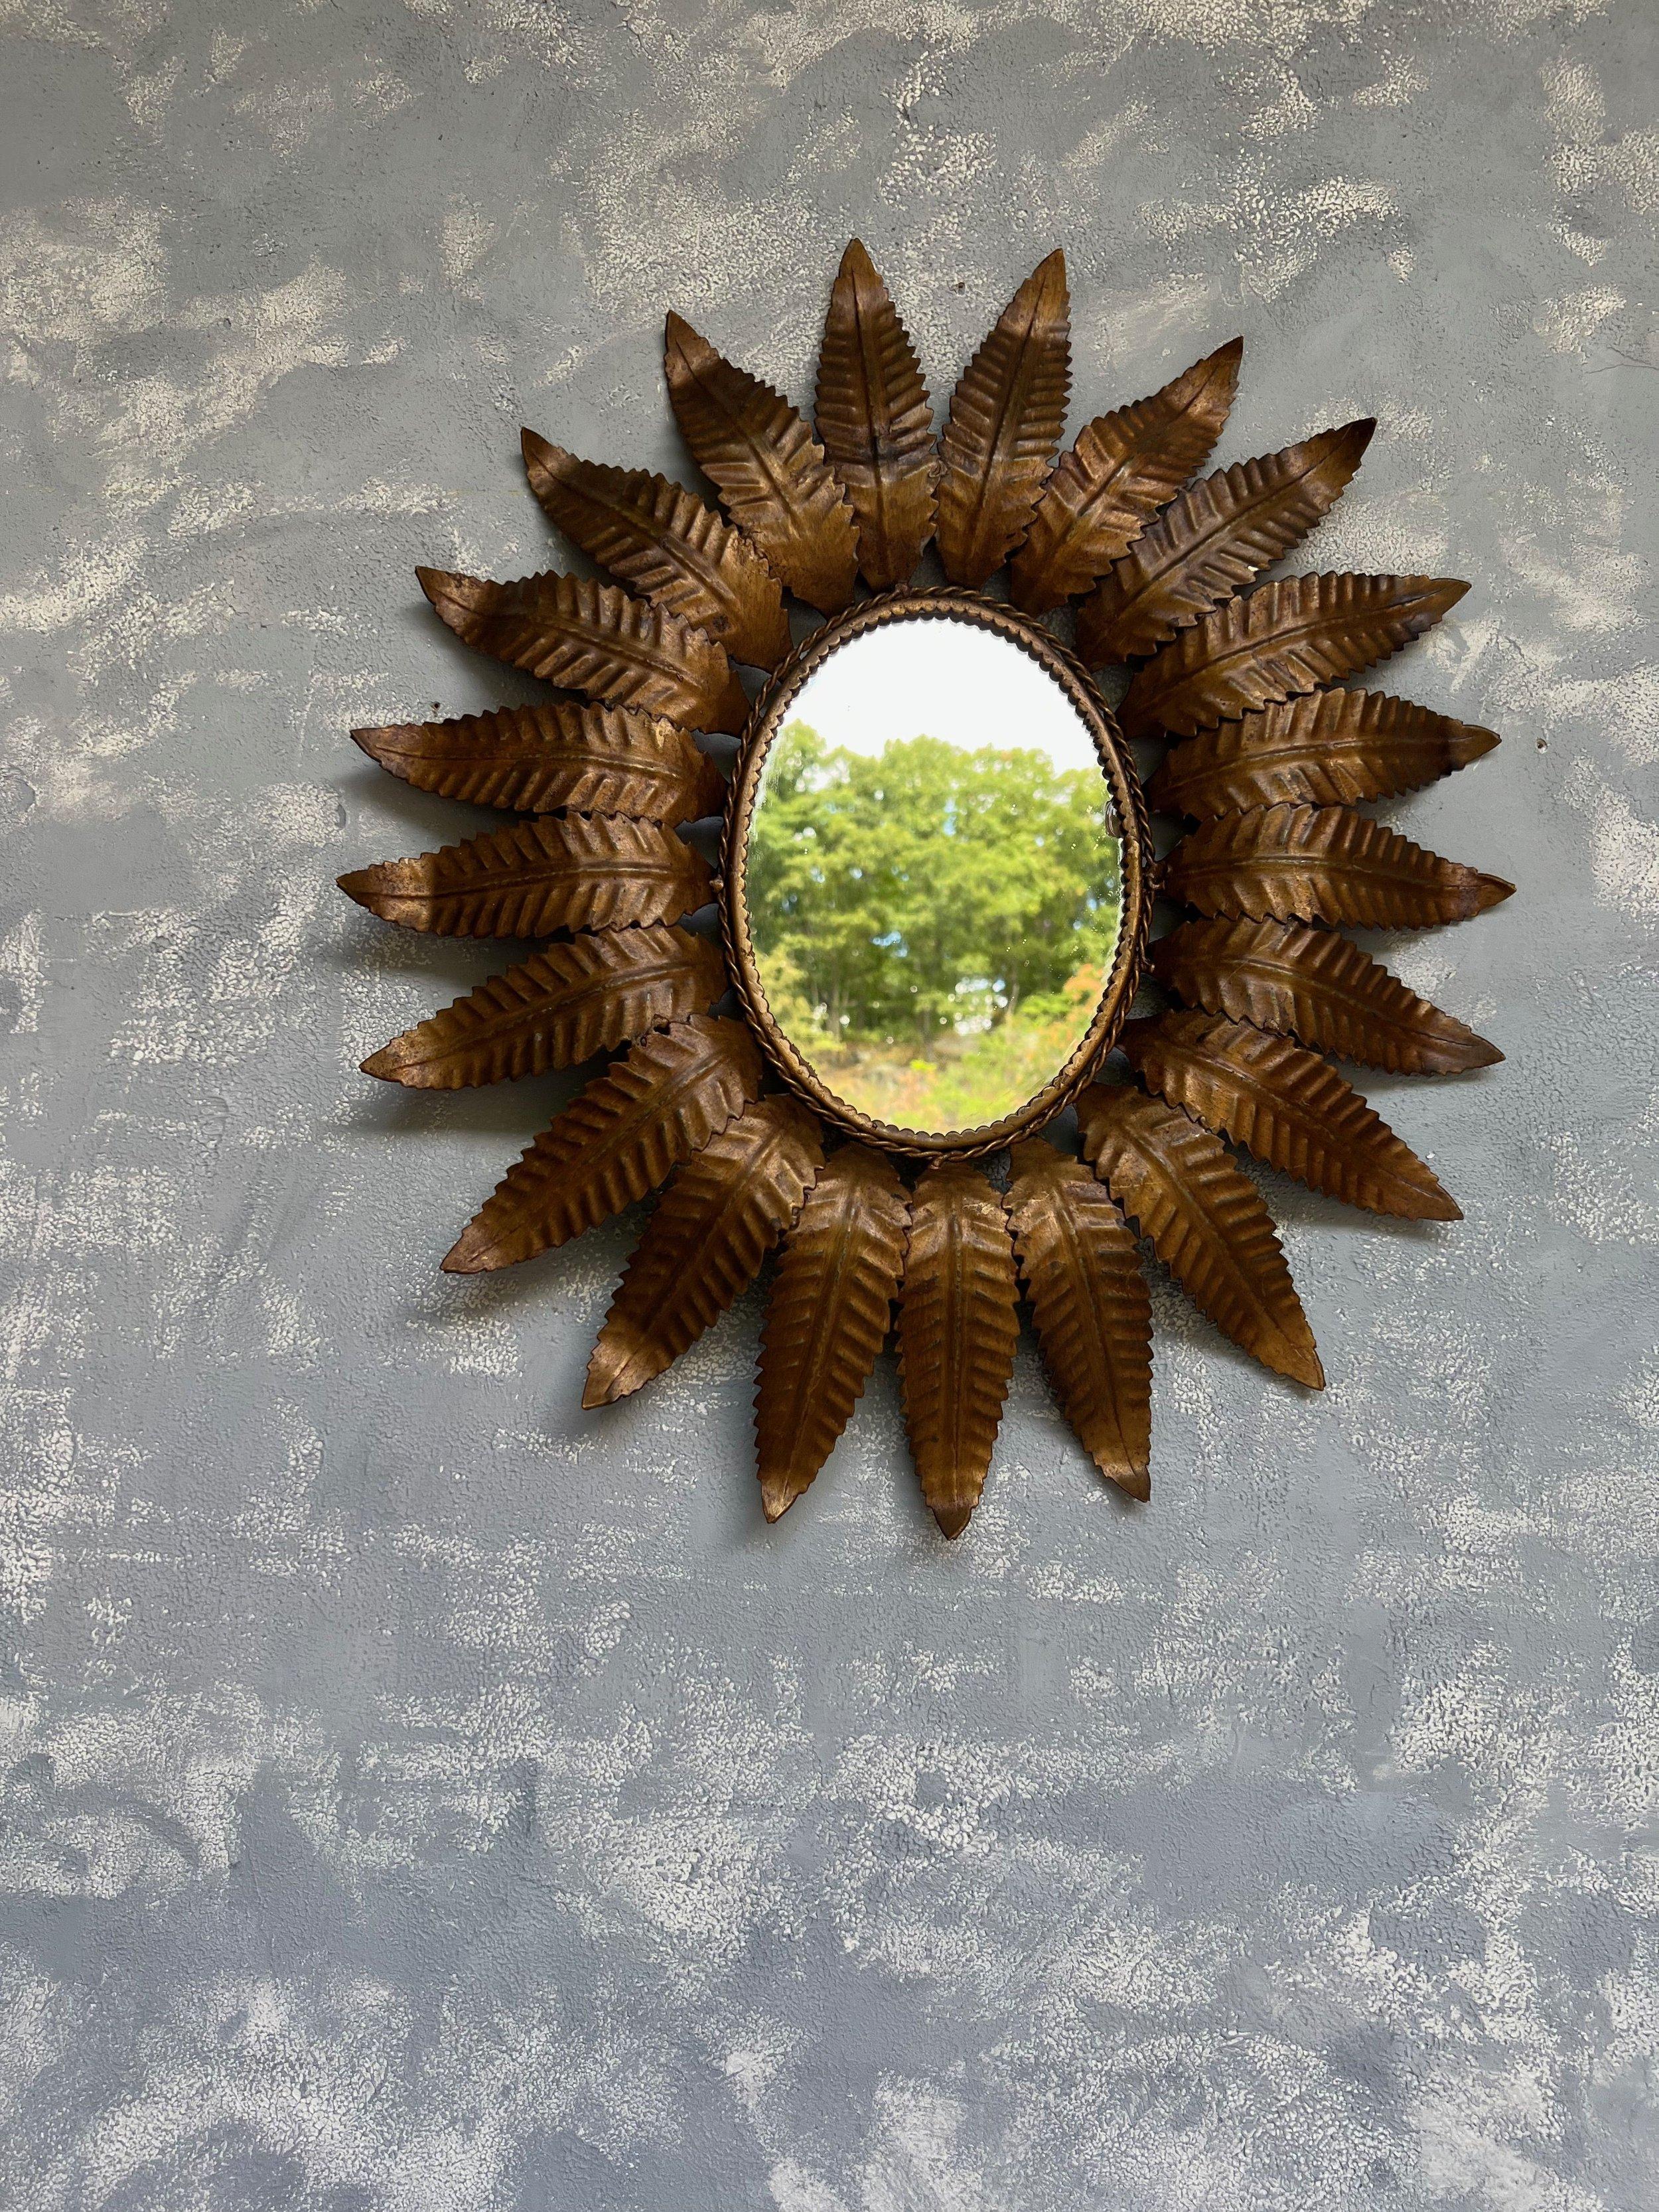 An exceptional Spanish 1950s oval sunburst mirror. This unusual mid-century oval sunburst mirror is a unique and stunning piece of decor. The evenly spaced rays or leaves surrounding the braided interior frame give it a distinctive and eye-catching